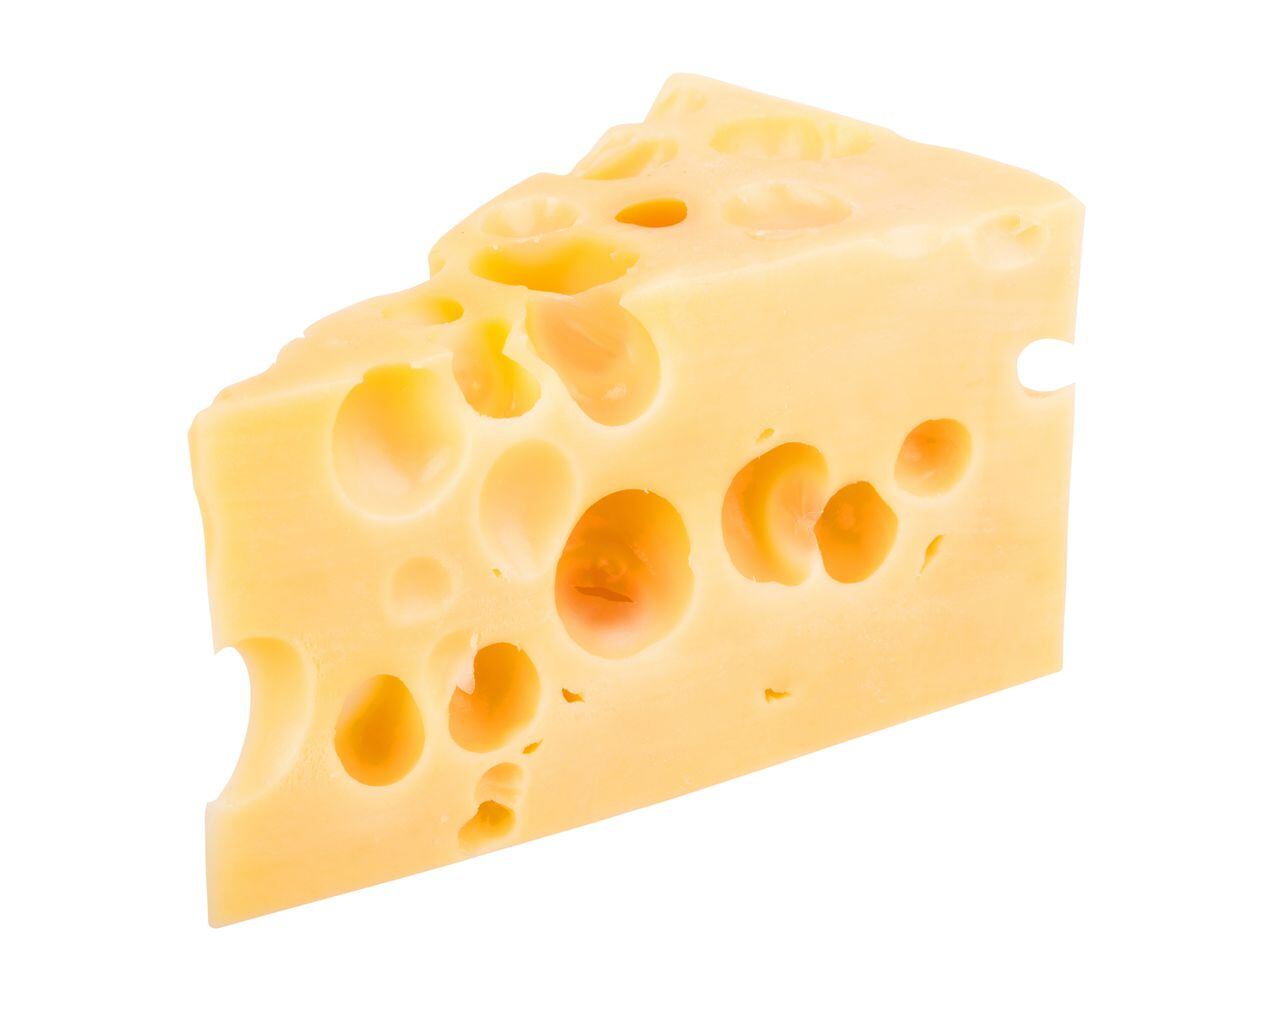 Cheese chunk isolated on white background